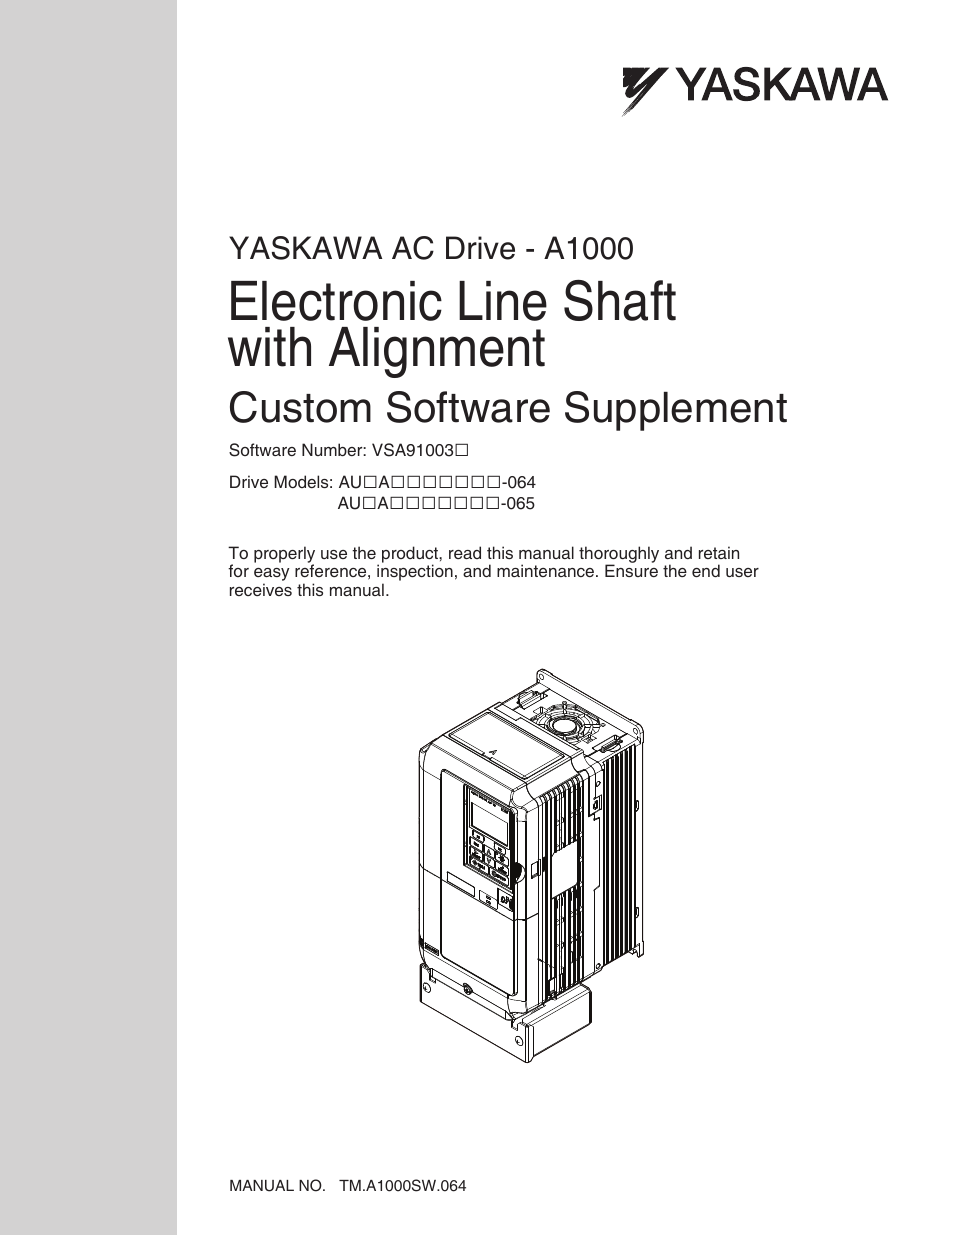 Electronic Lineshaft with Alignment A1000 Drive Software